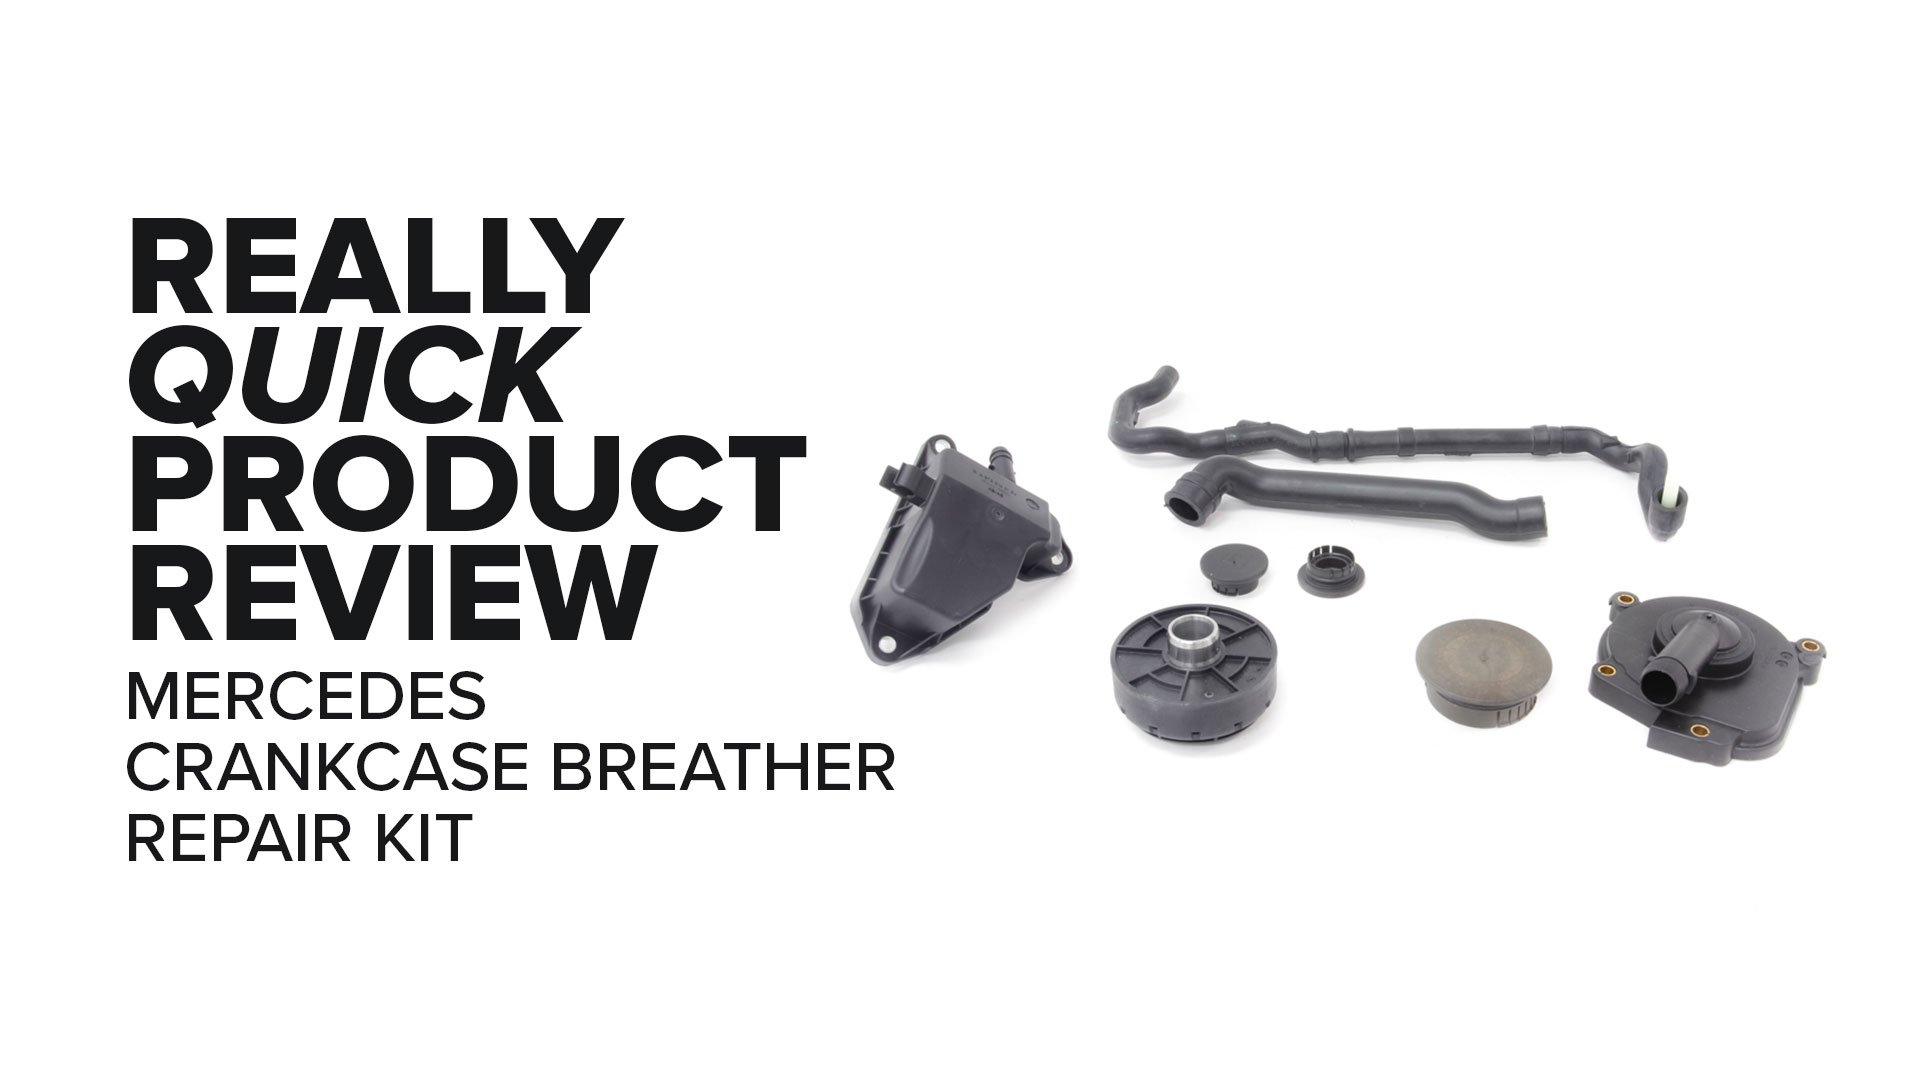 Mercedes-Benz W204 (C300, E350, ML350, & More) Crankcase Breather Repair Kit - Features, Symptoms, And Product Review